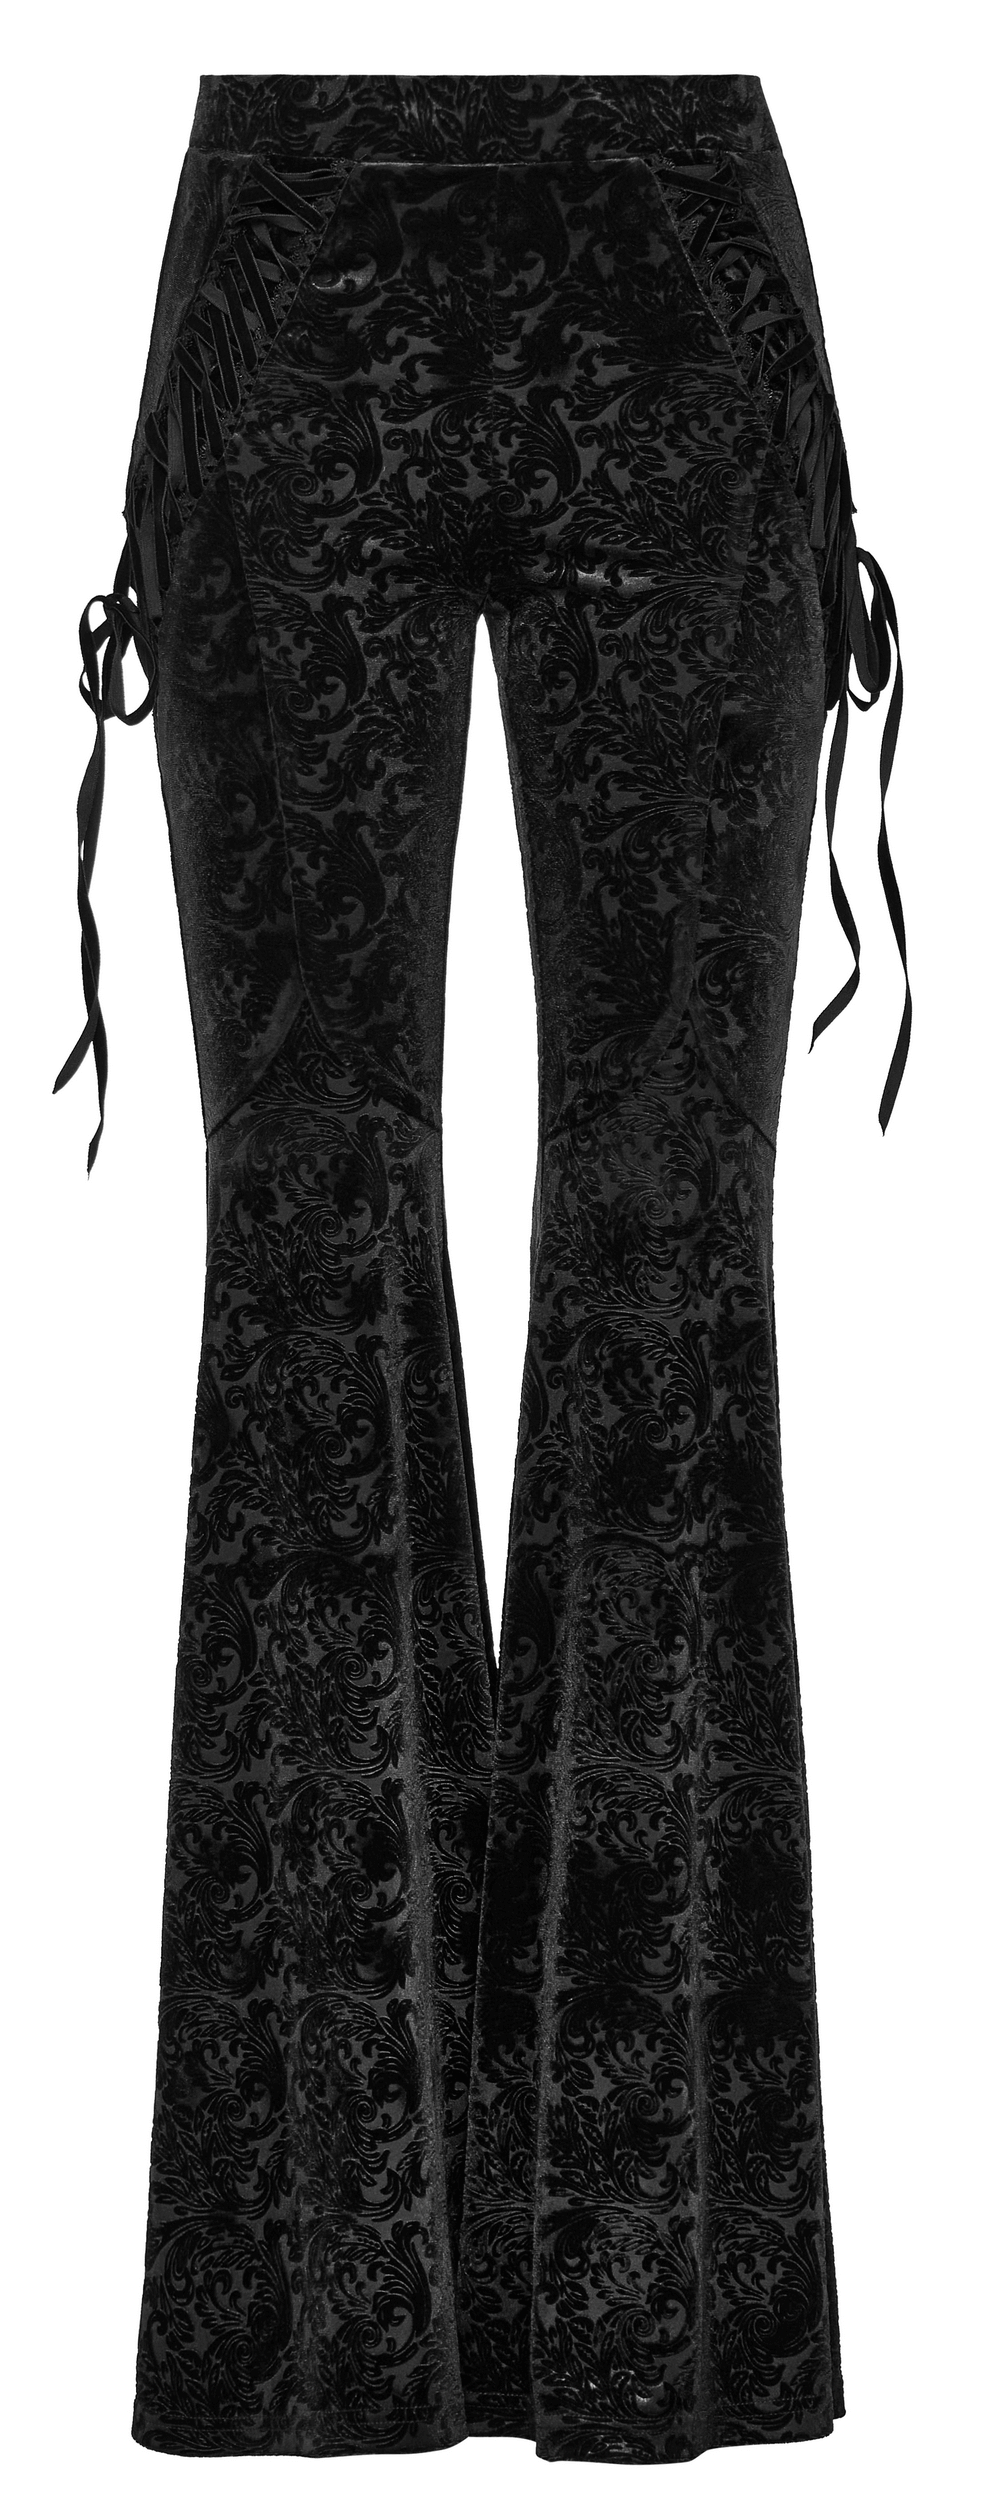 Elastic Velvet Gothic Flare Pants with Side Lacing - HARD'N'HEAVY